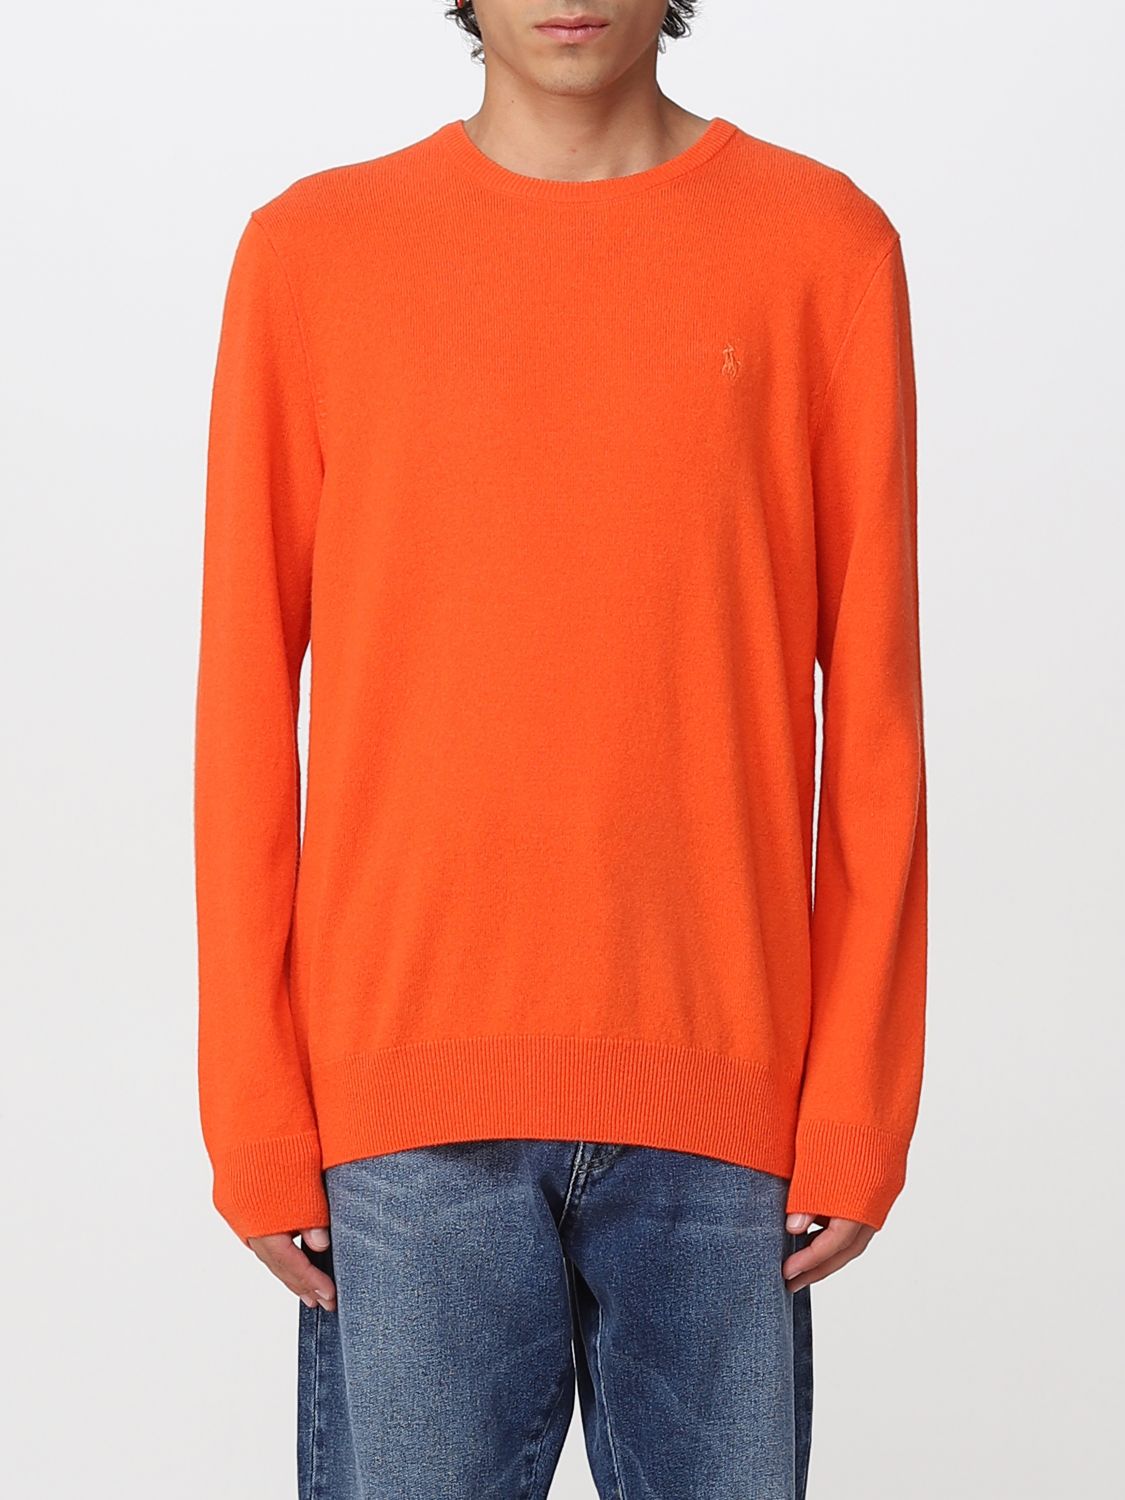 Polo Ralph Lauren Outlet: sweater for man - Orange | Polo Ralph Lauren  sweater 710876714 online on 